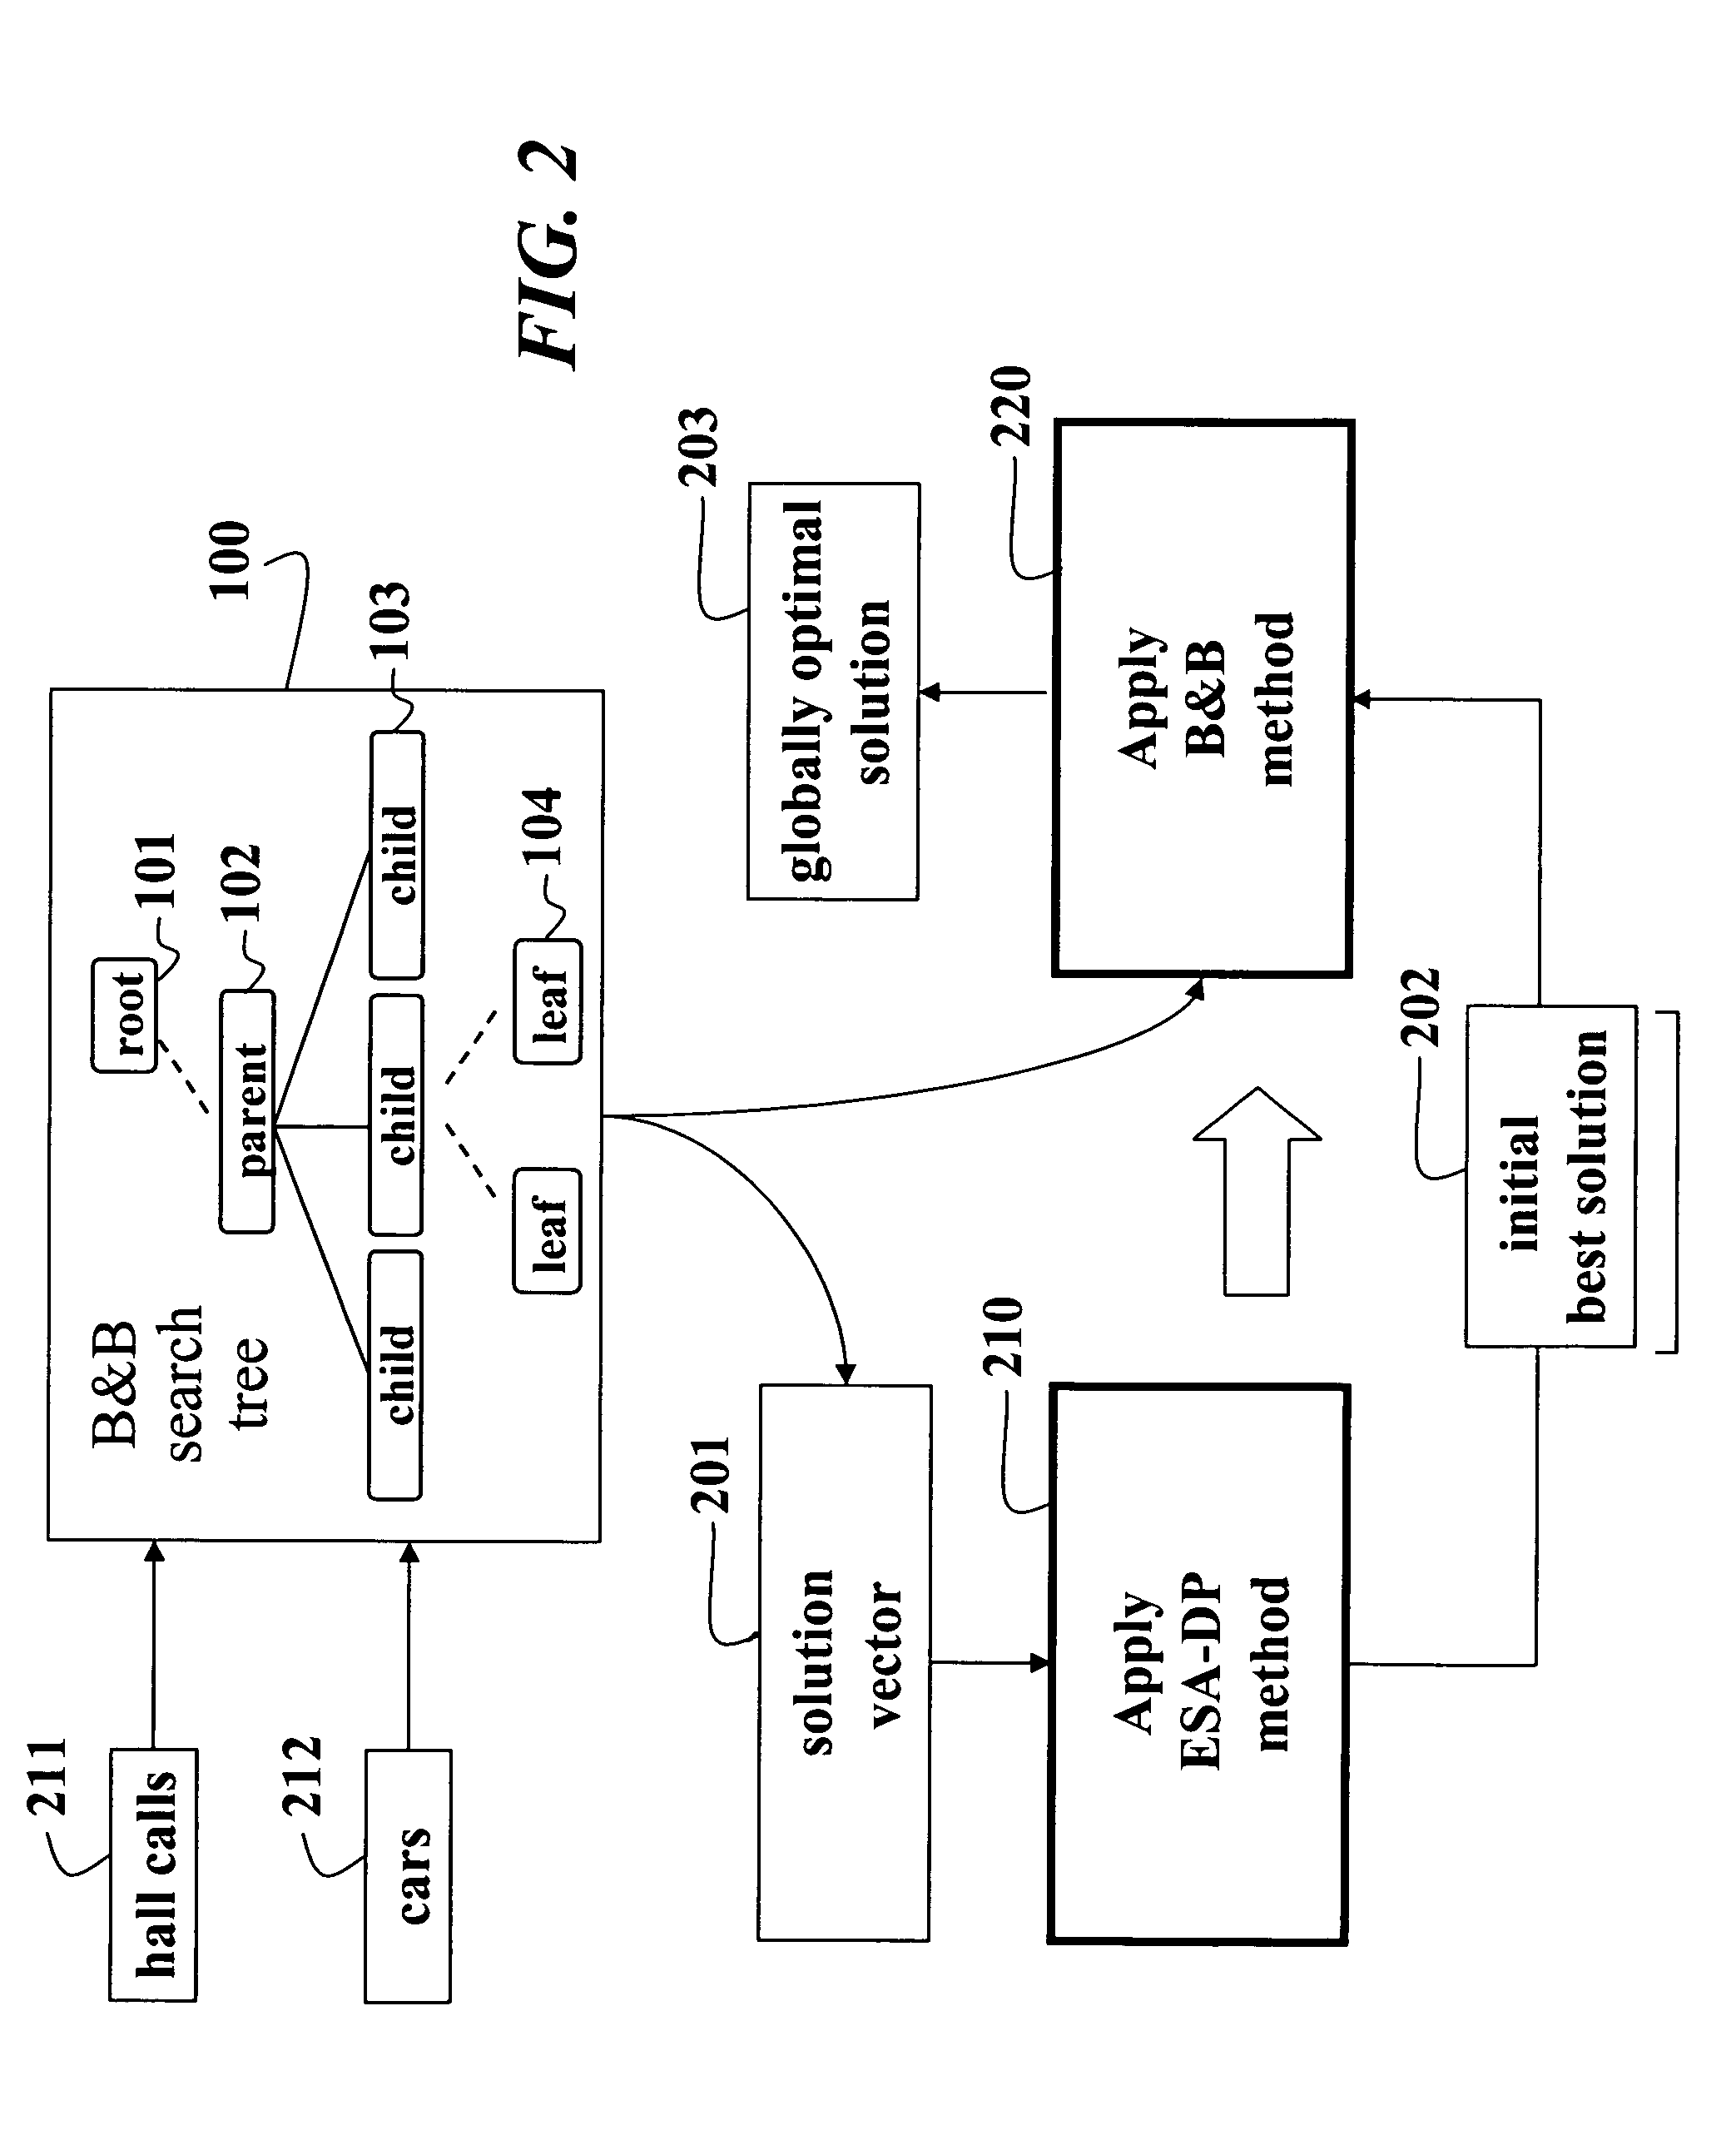 System and method for scheduling elevator cars using branch-and-bound